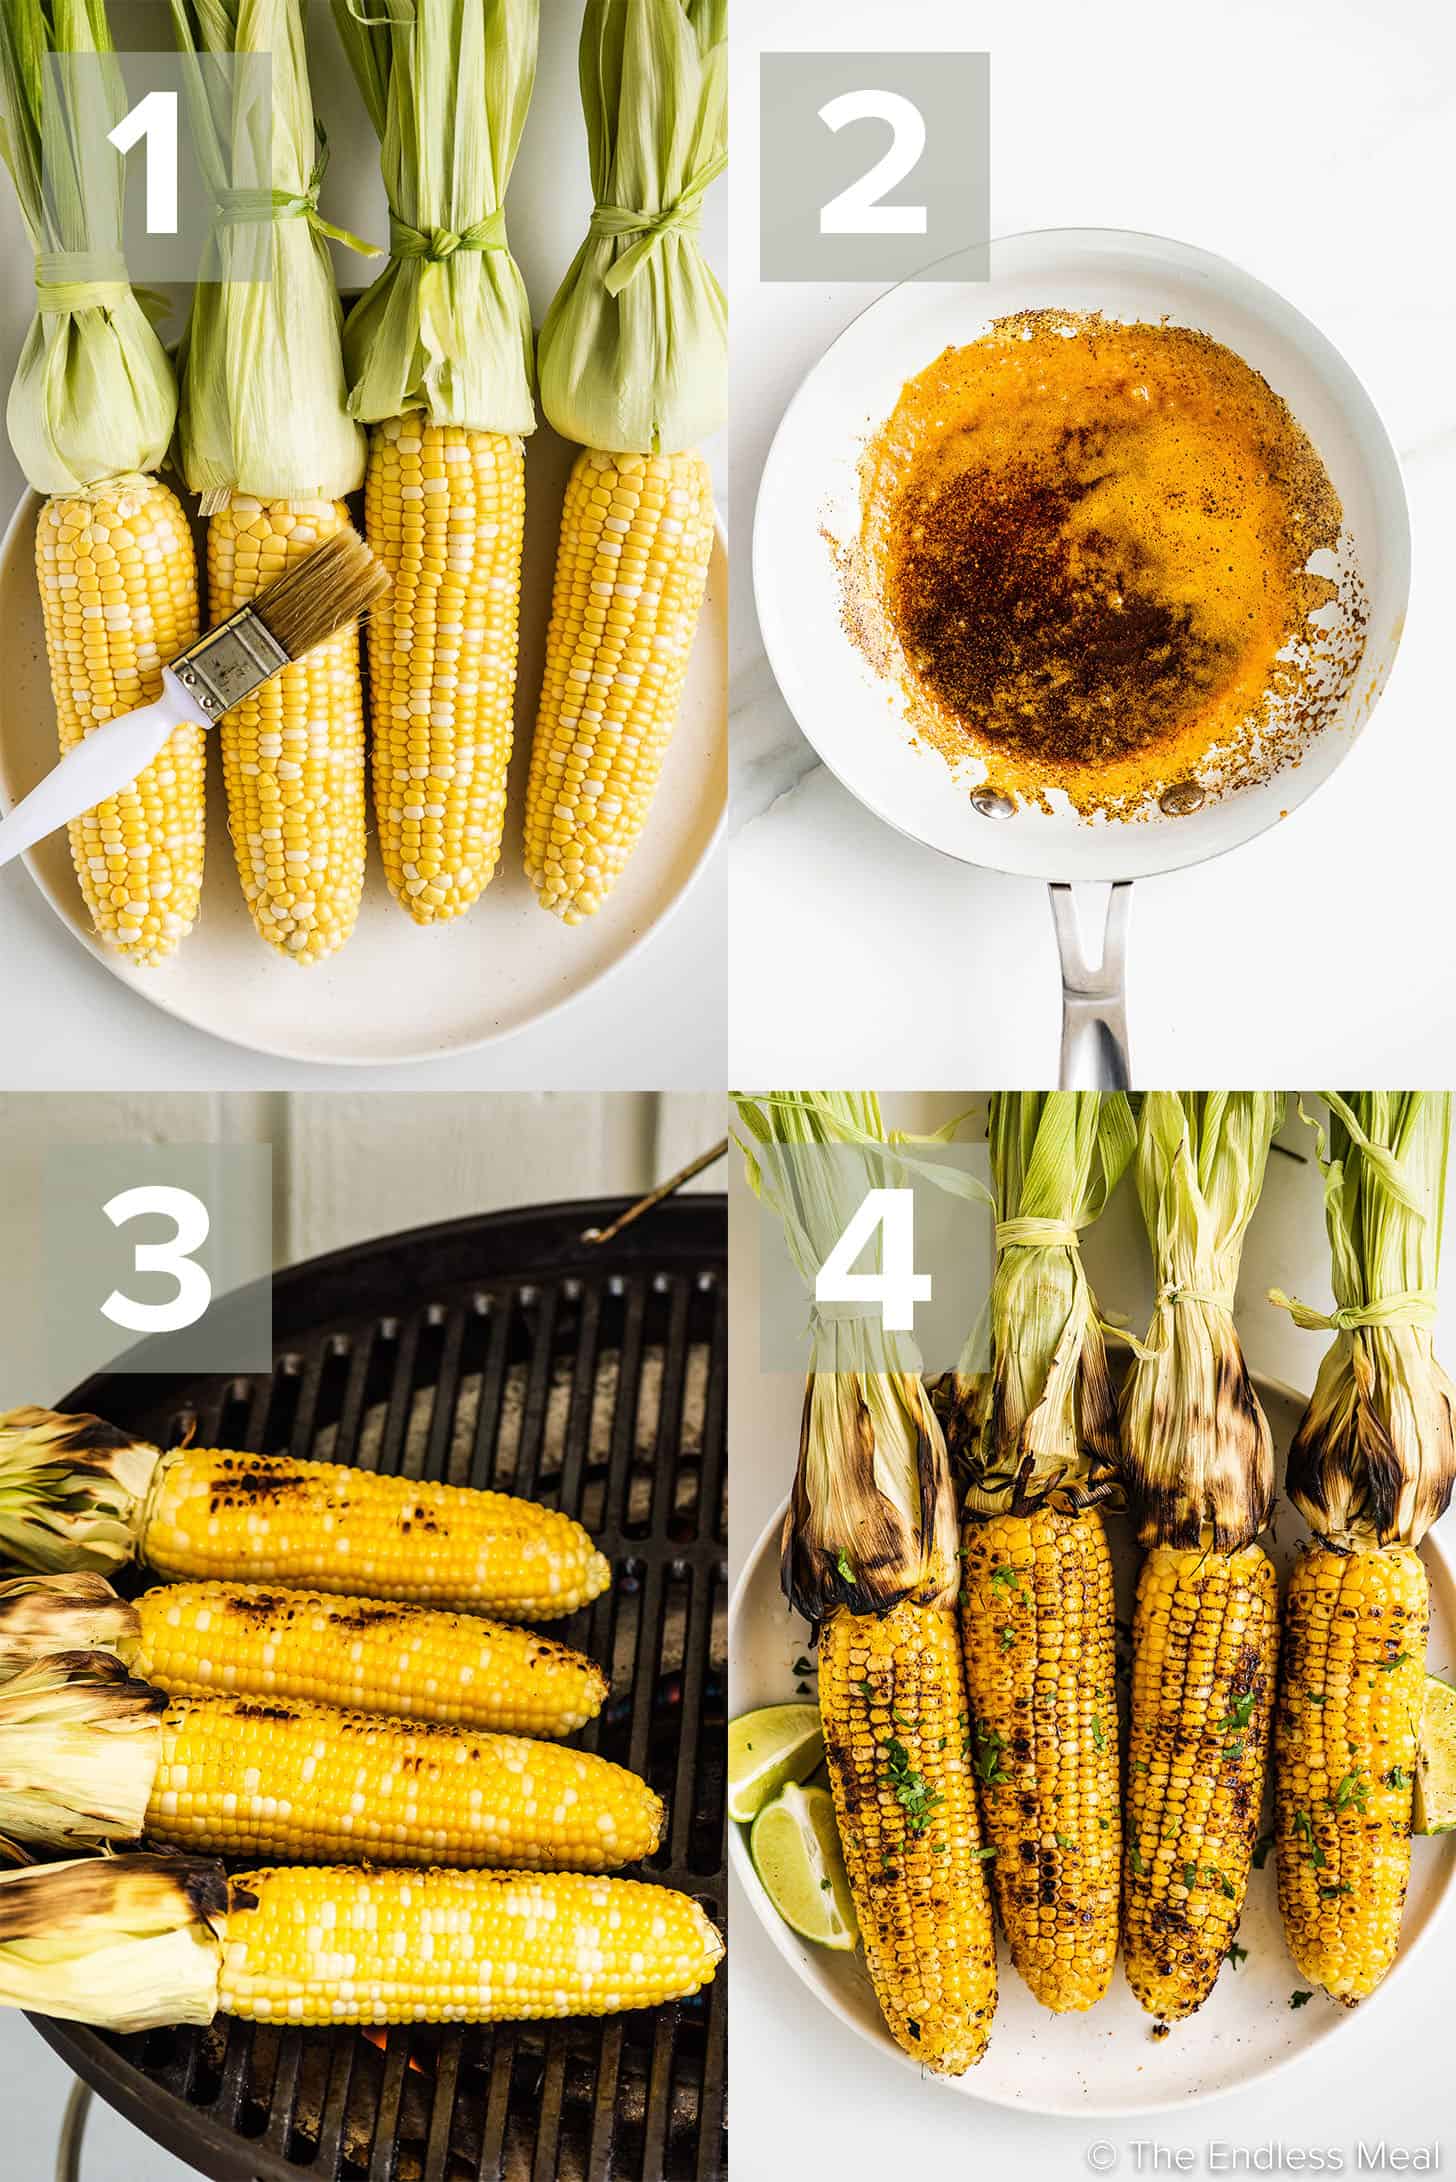 4 pictures showing how to make Grilled Corn on the Cob with Chili Lime Butter